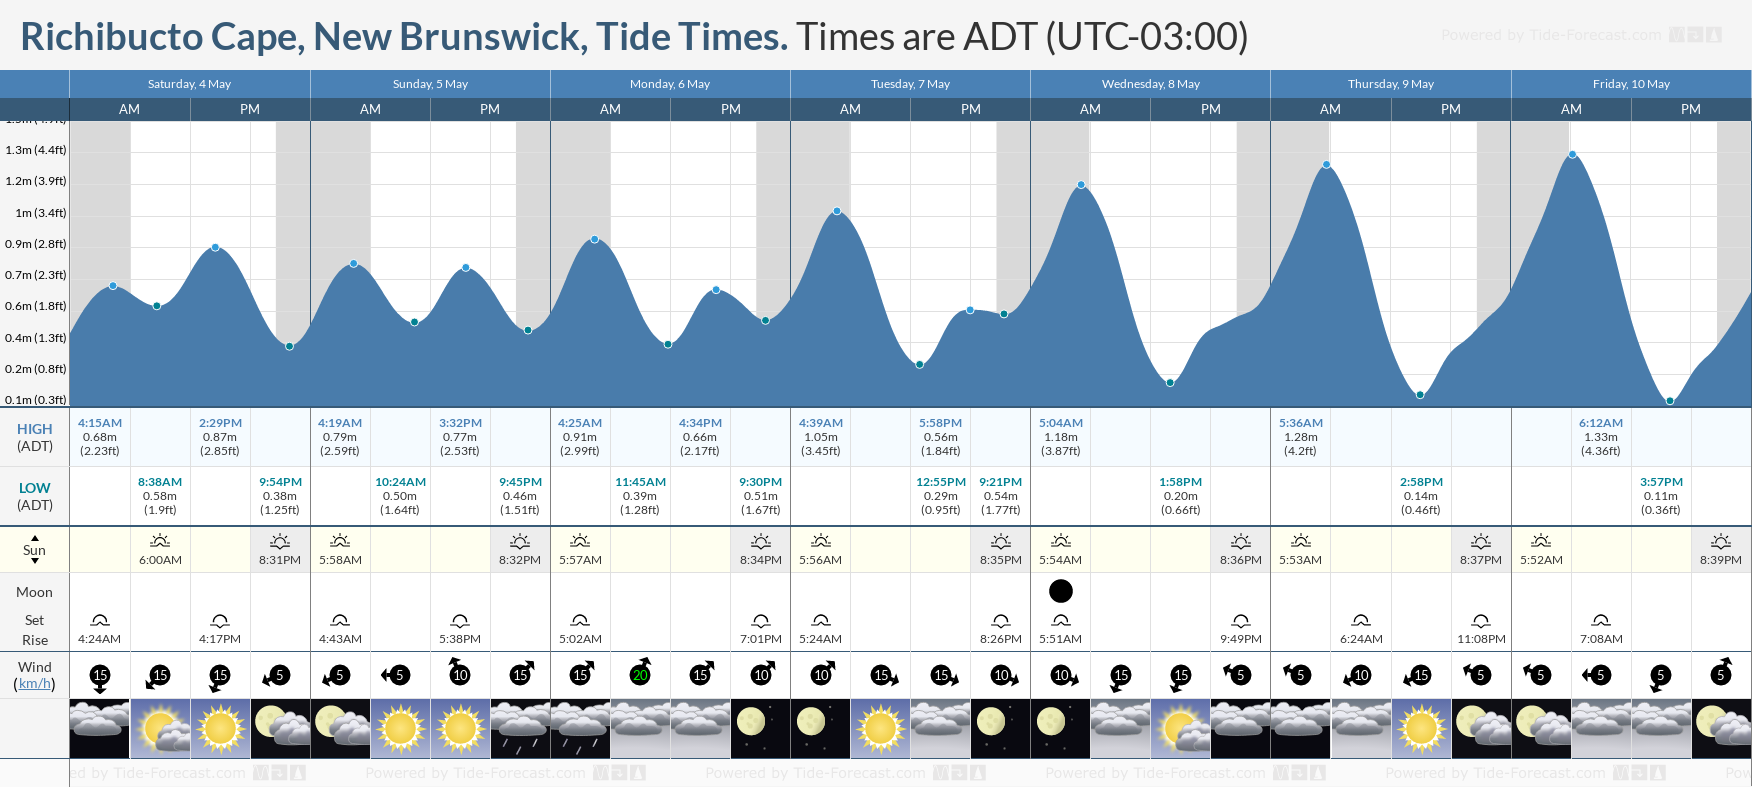 Richibucto Cape, New Brunswick Tide Chart including high and low tide tide times for the next 7 days